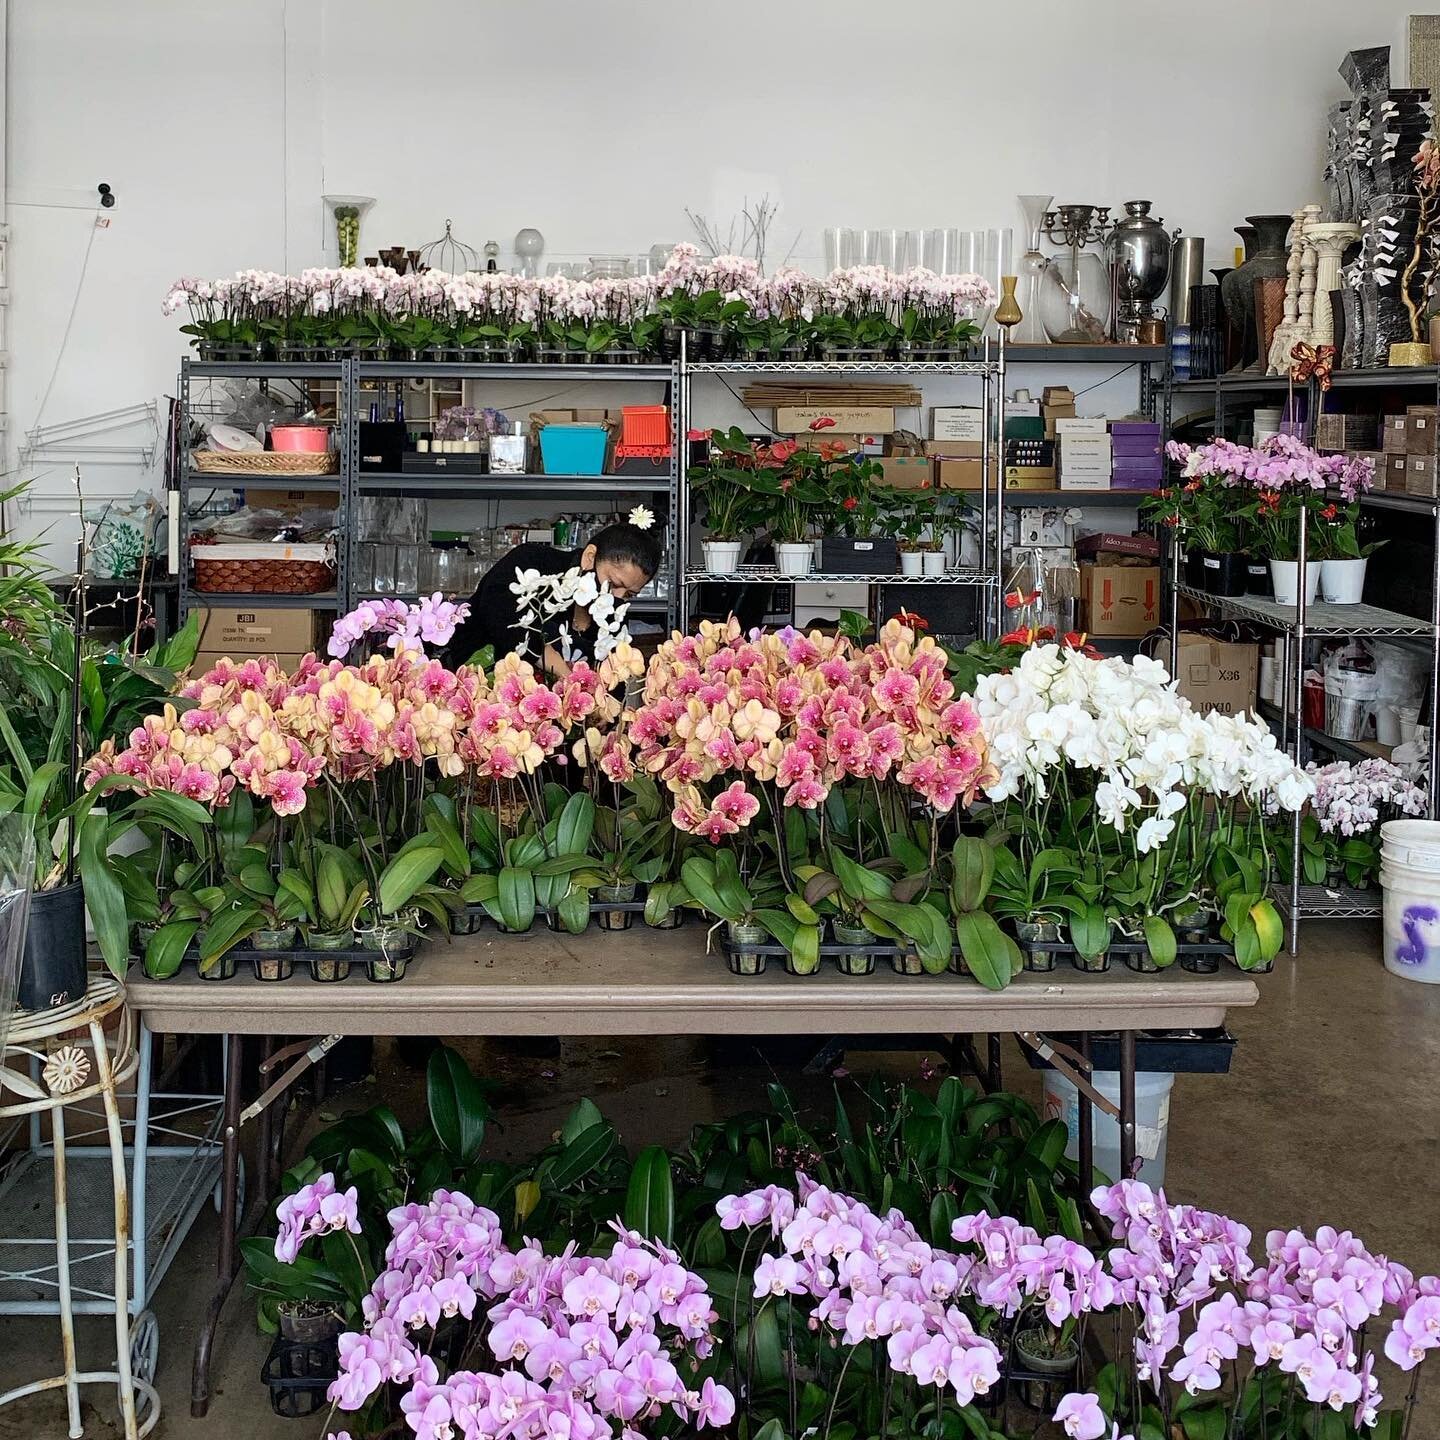 This isn&rsquo;t even 1/3 of our Orchid inventory 😱

Come visit our shop and see for yourself!

&bull;
&bull;
&bull;
&bull;

#floristsofinstagram #ocflorist #orchidsofinstagram #orchidlover #orchidspecies #orchidforest #flowerarrangements #floralins